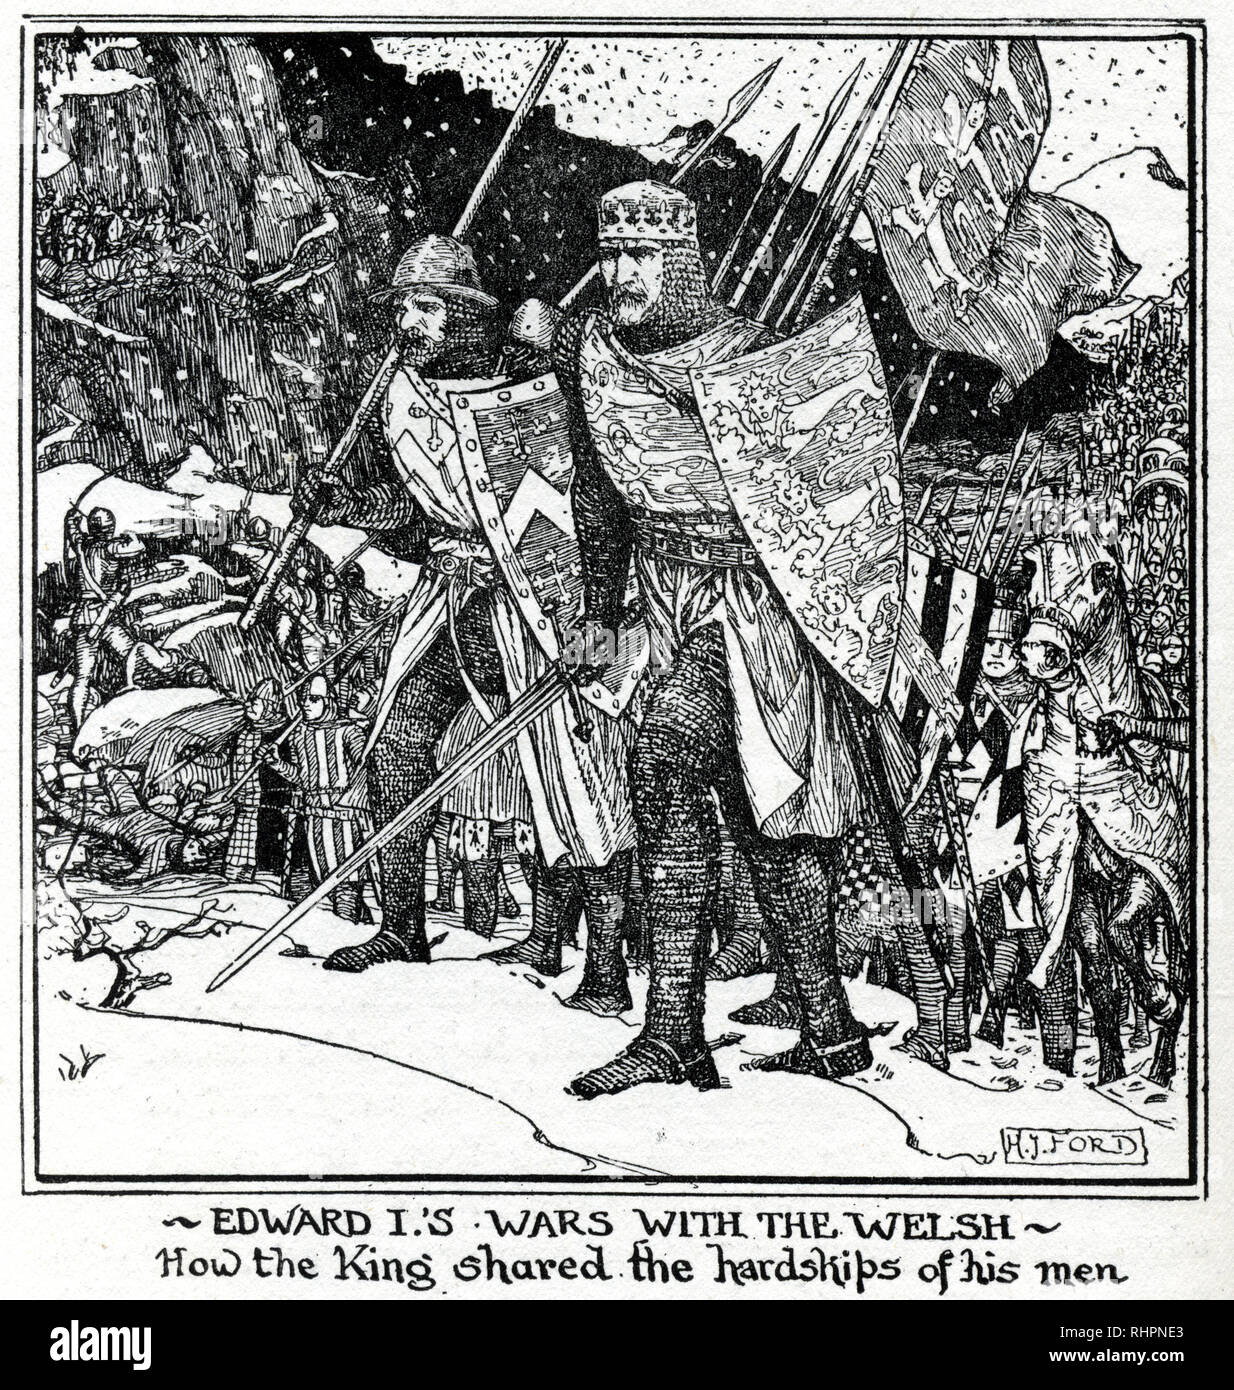 Edward I's wars with the Welsh. By Henry Justice Ford (1860-1941). The conquest of Wales by Edward I (Edwardian Conquest of Wales) took place between 1277 and 1283. It resulted in the defeat and annexation of the Principality of Wales. Stock Photo